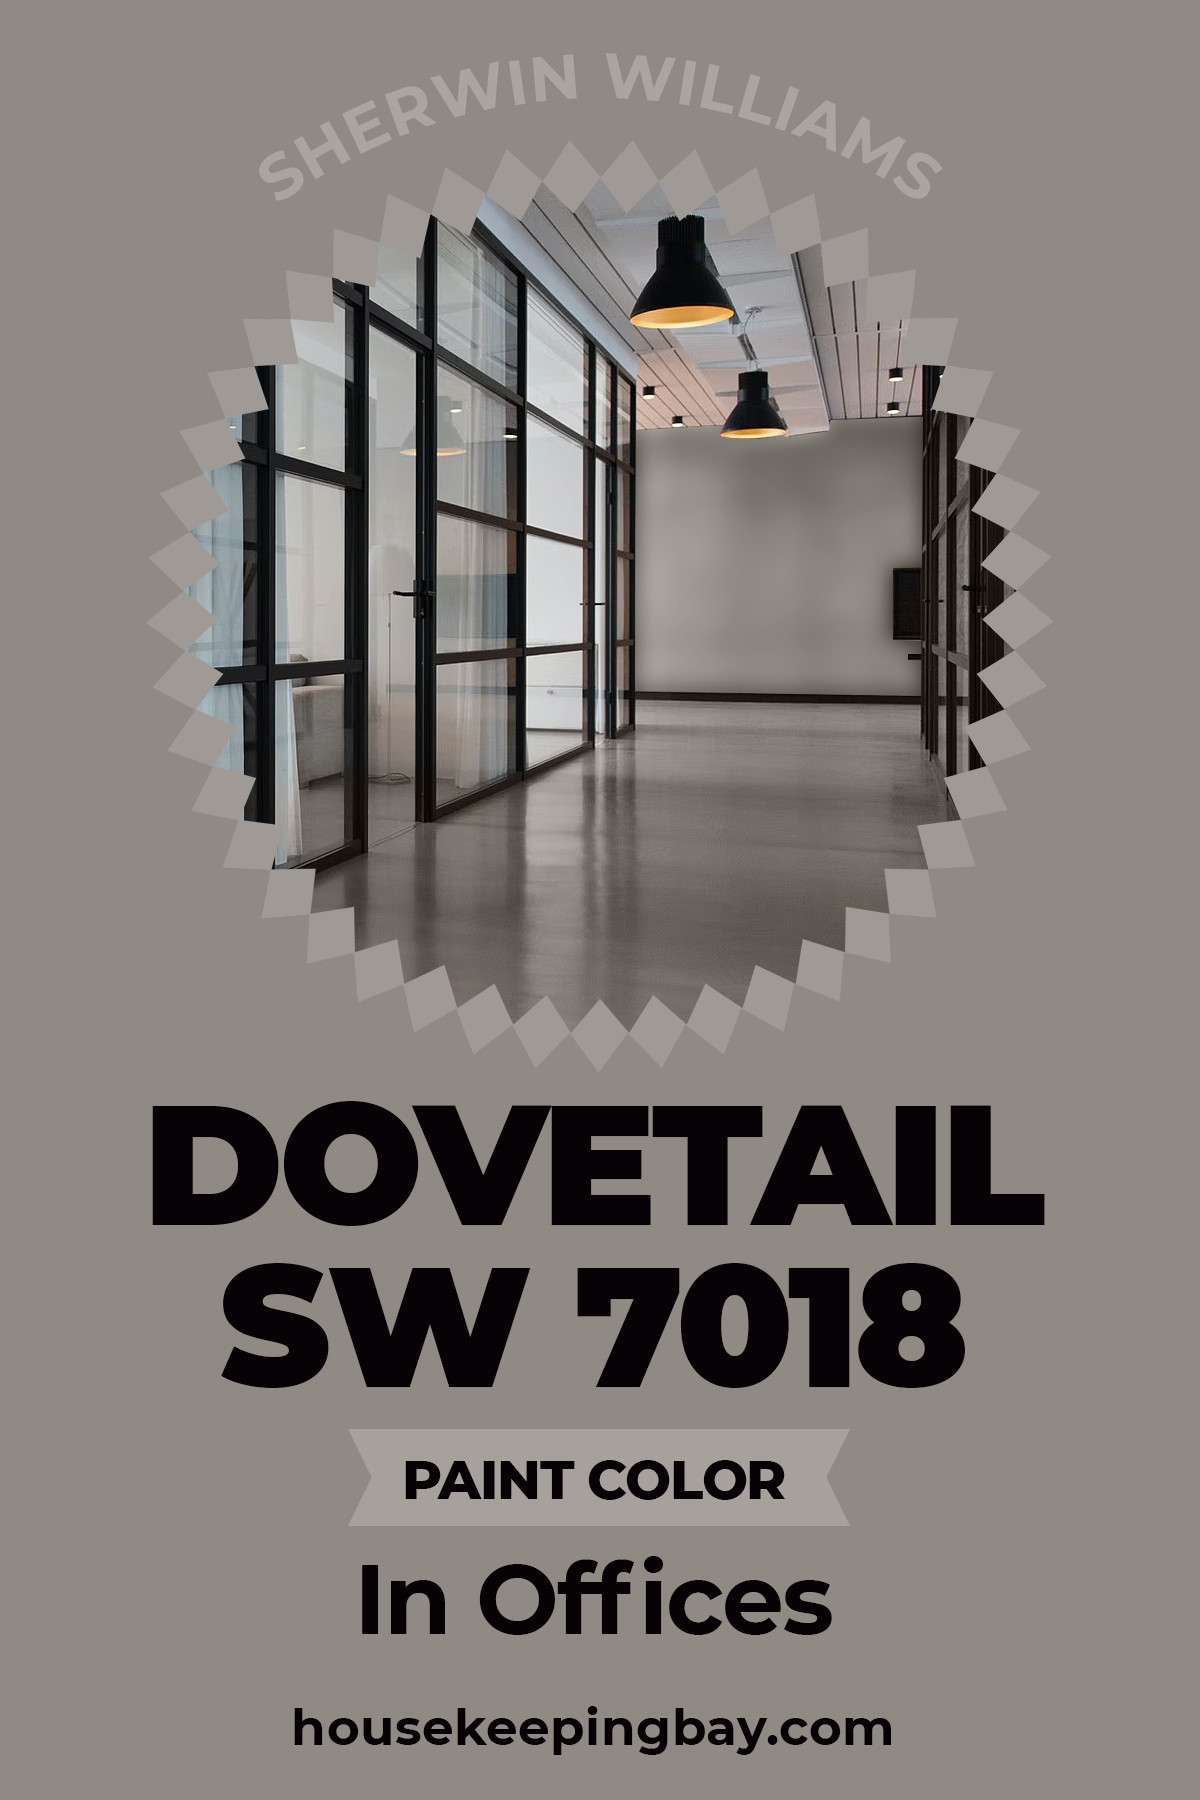 Sherwin Williams Dovetail Paint Color in offices